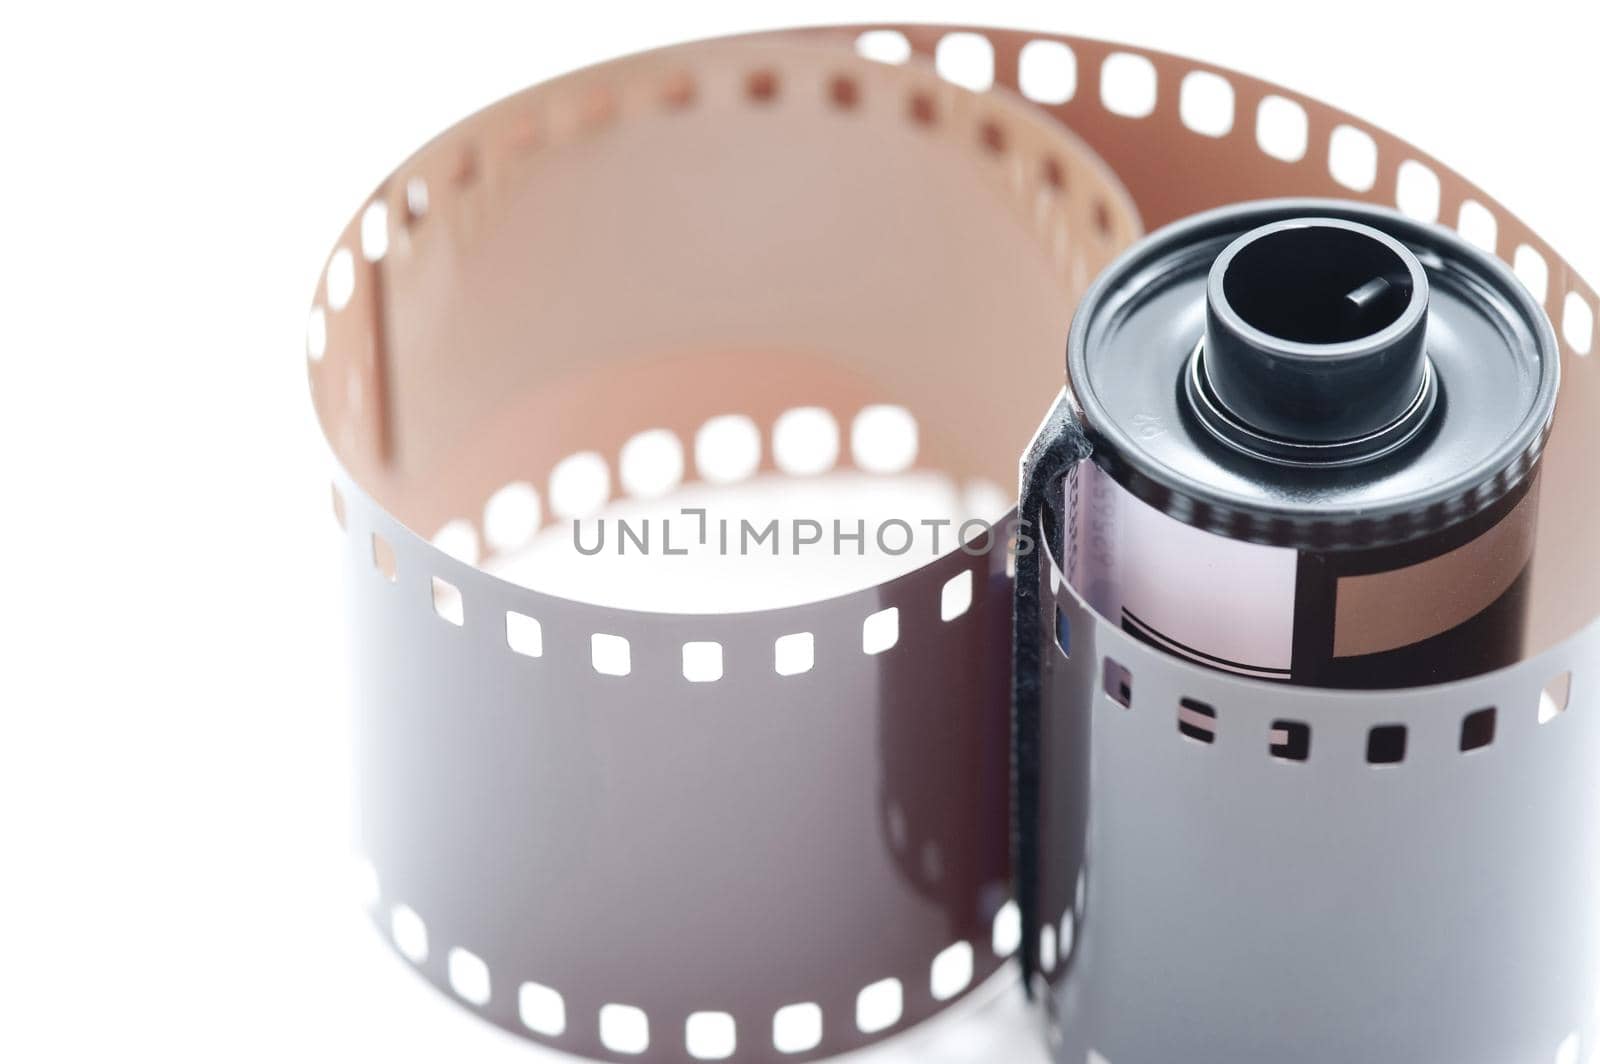 35mm Film Cannister with Exposed Film by sanisra